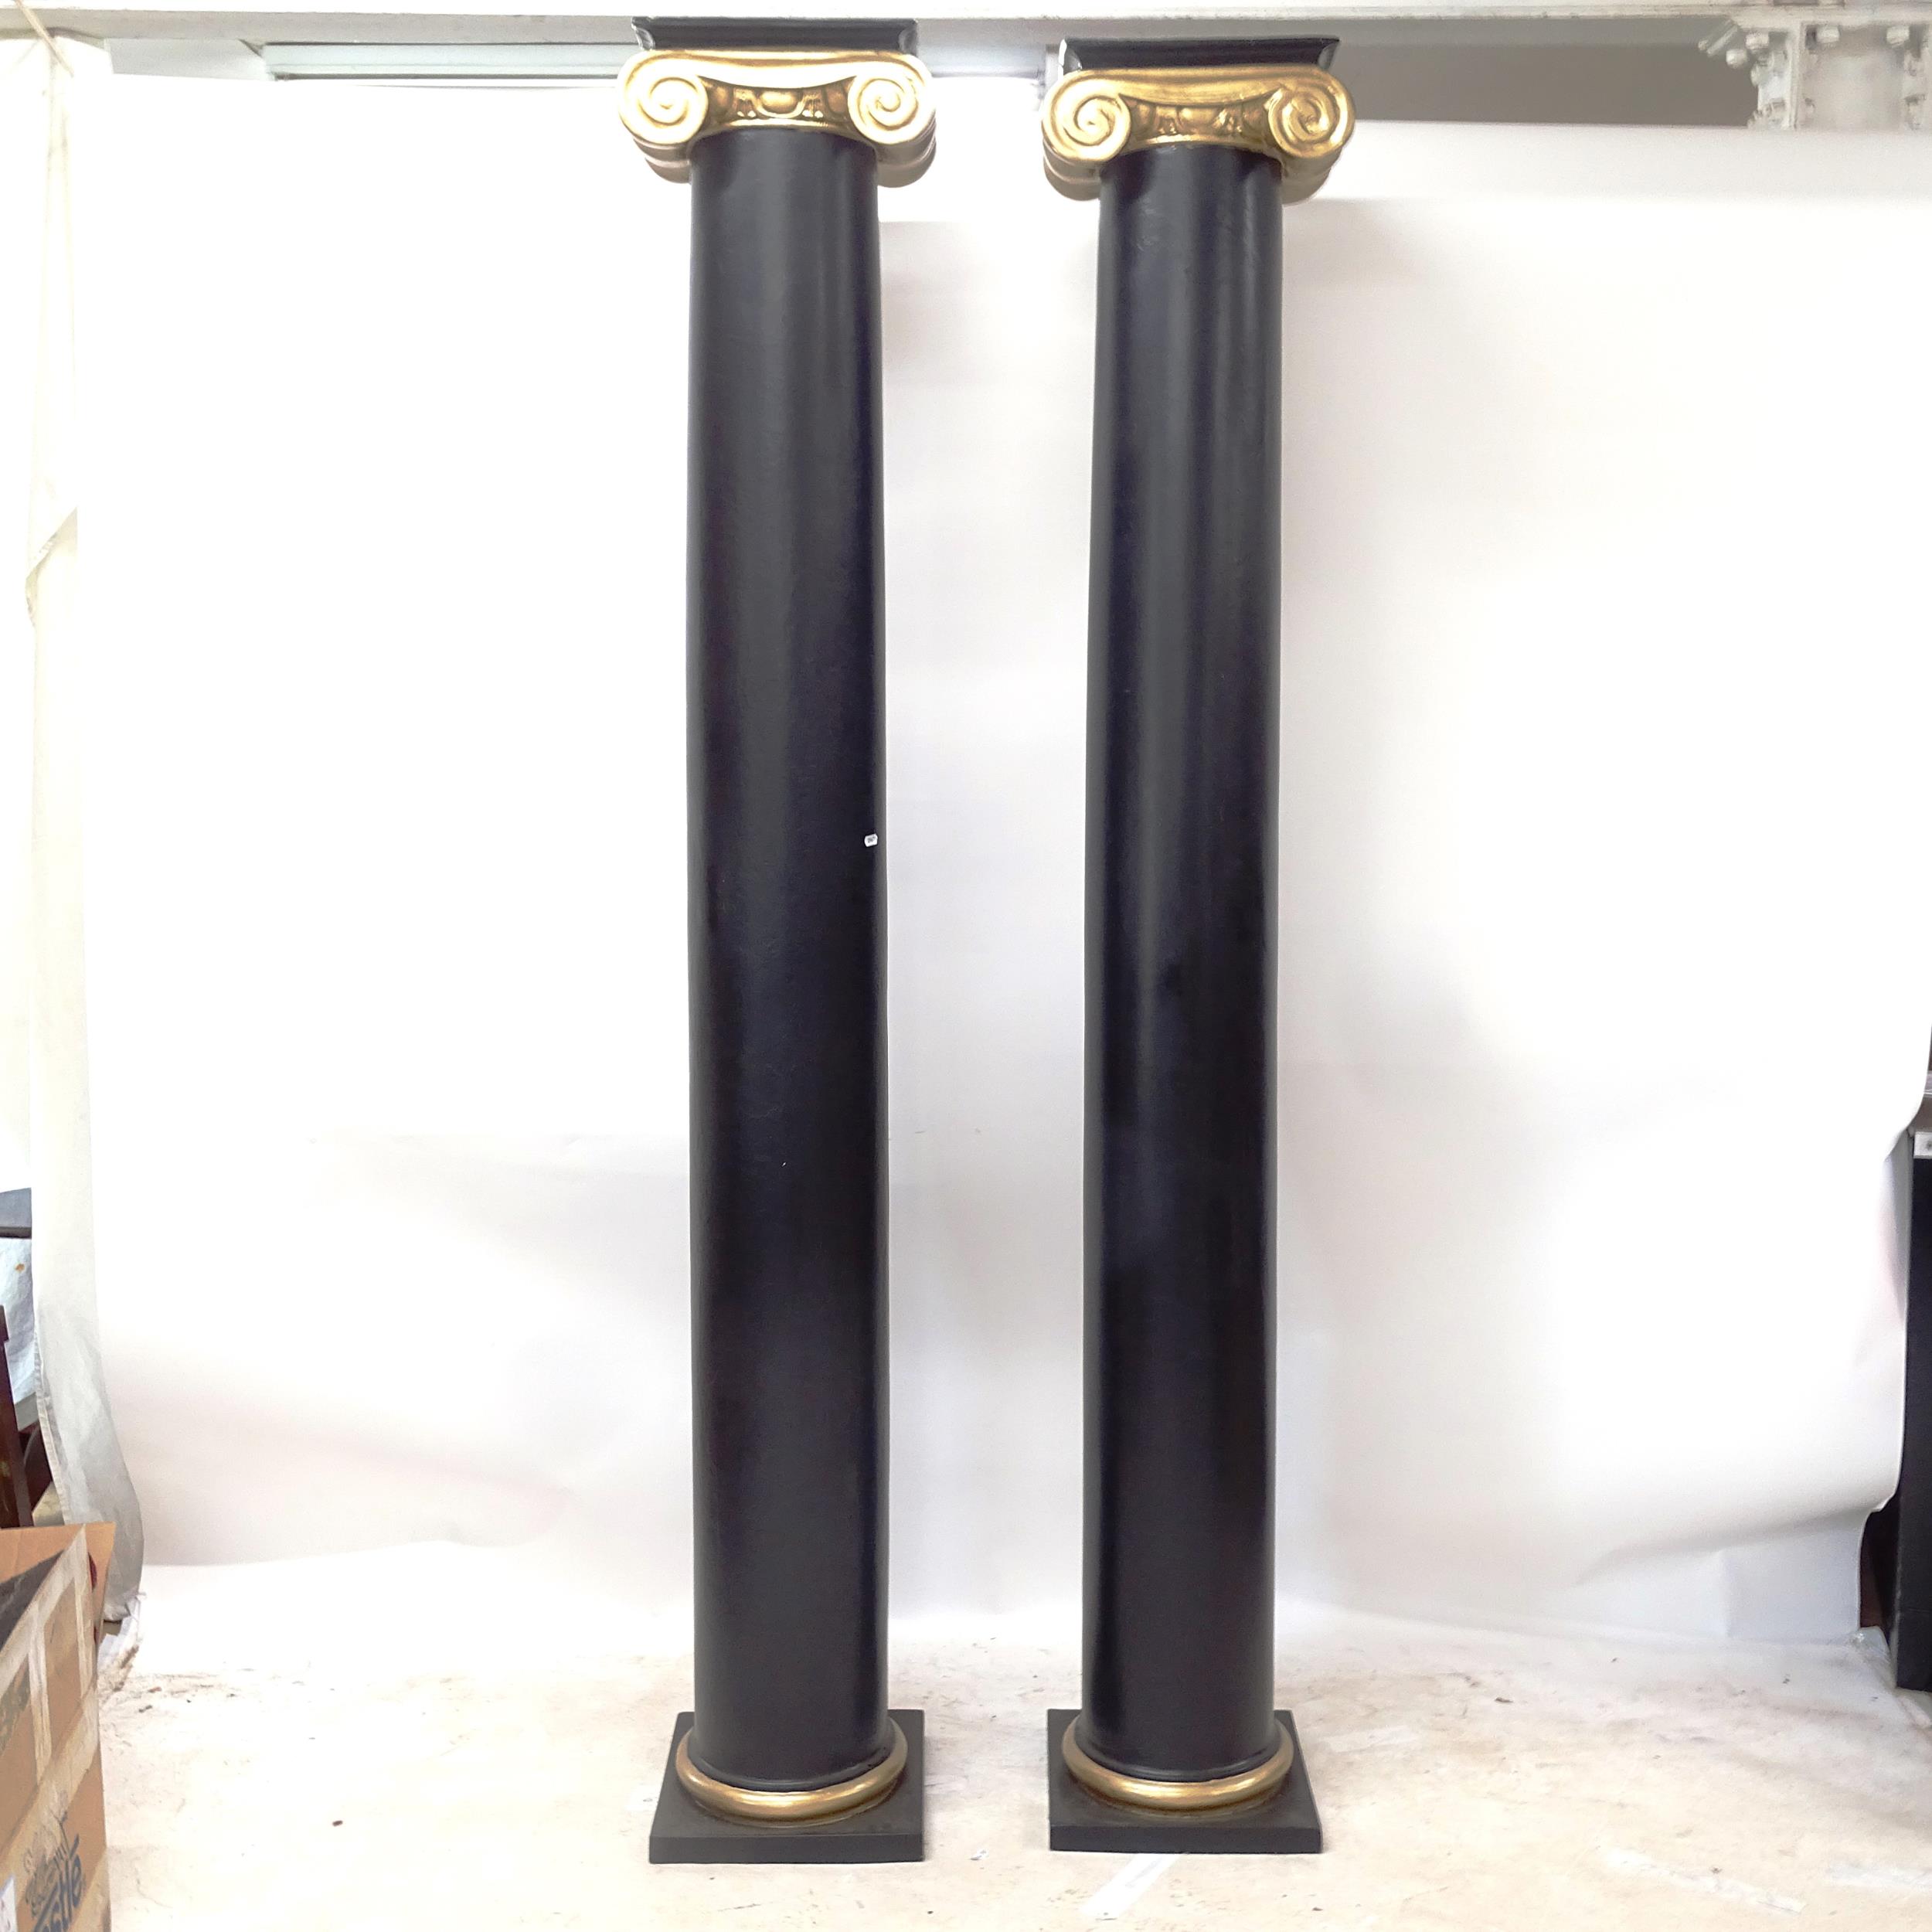 A pair of fibreglass Ionic columns painted in black and gold, H229cm - Image 2 of 2